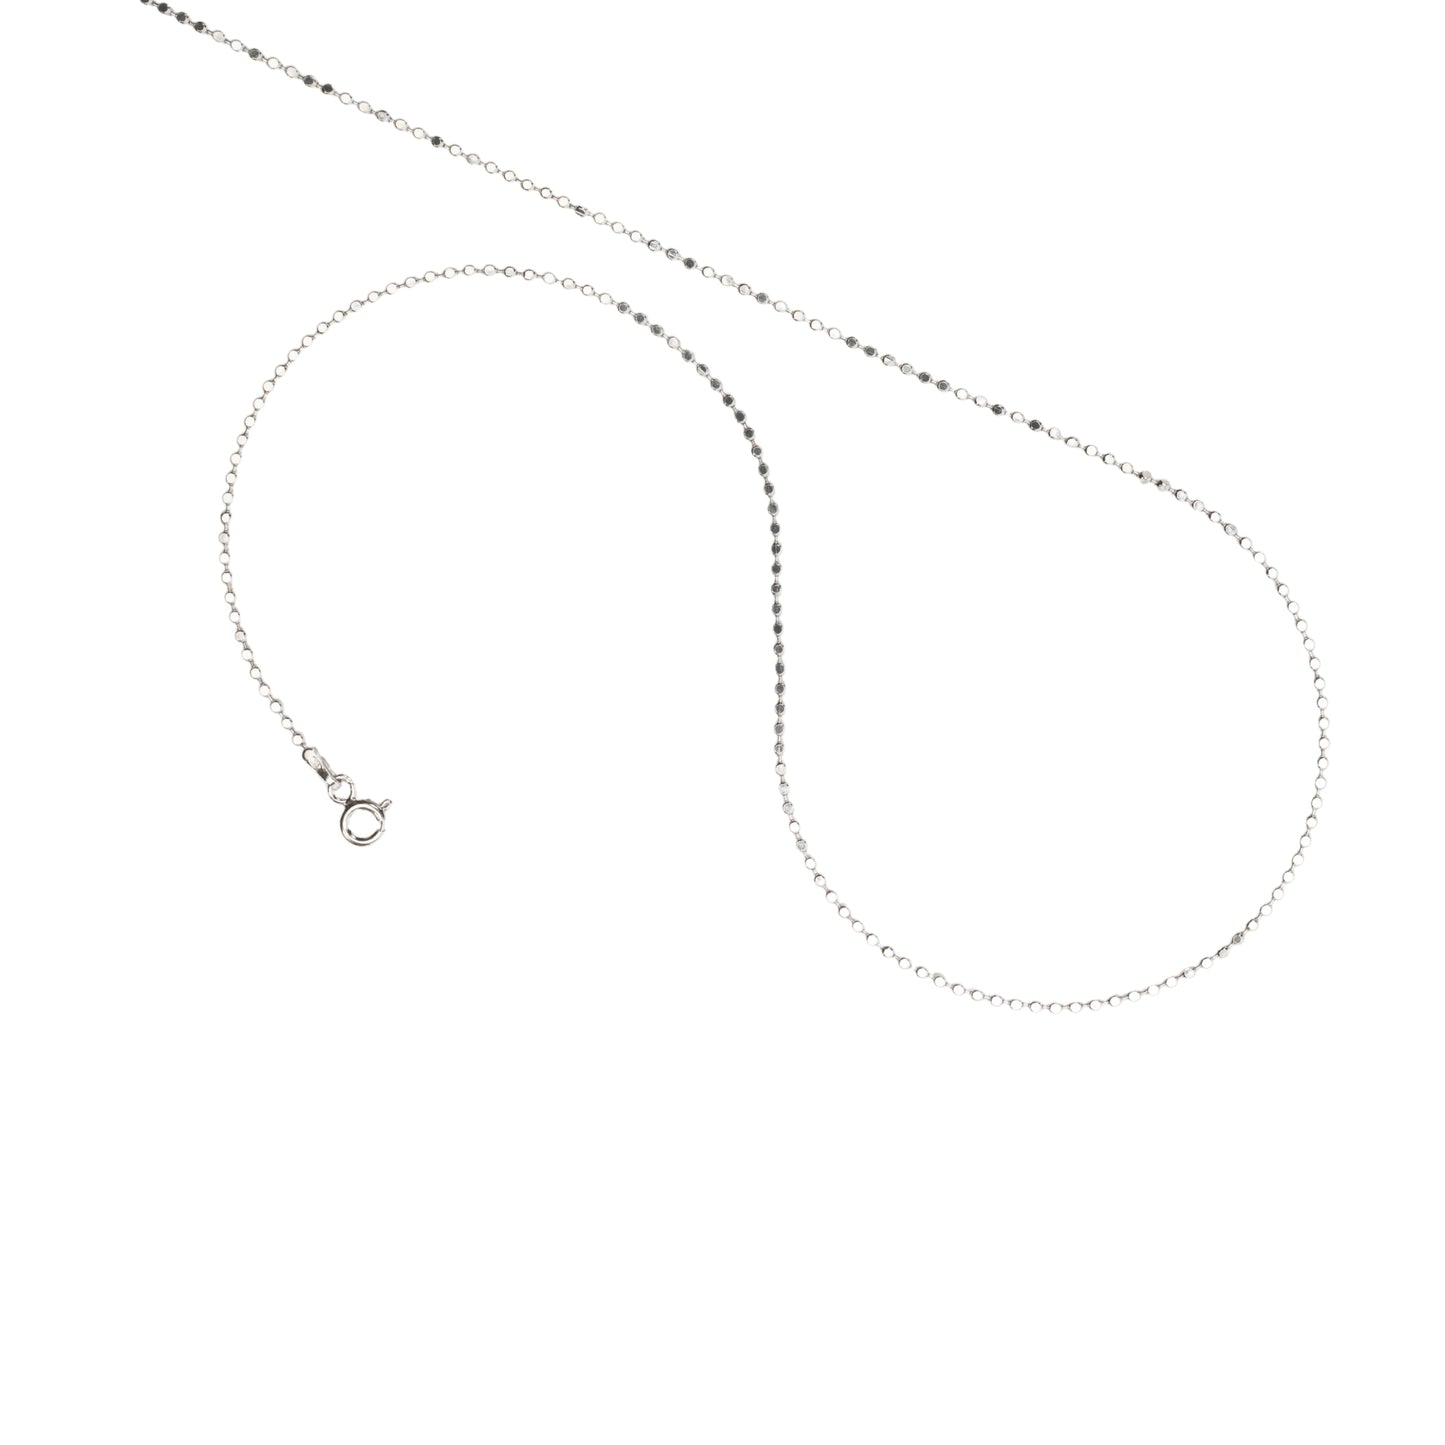 sterling silver necklace 16 inches